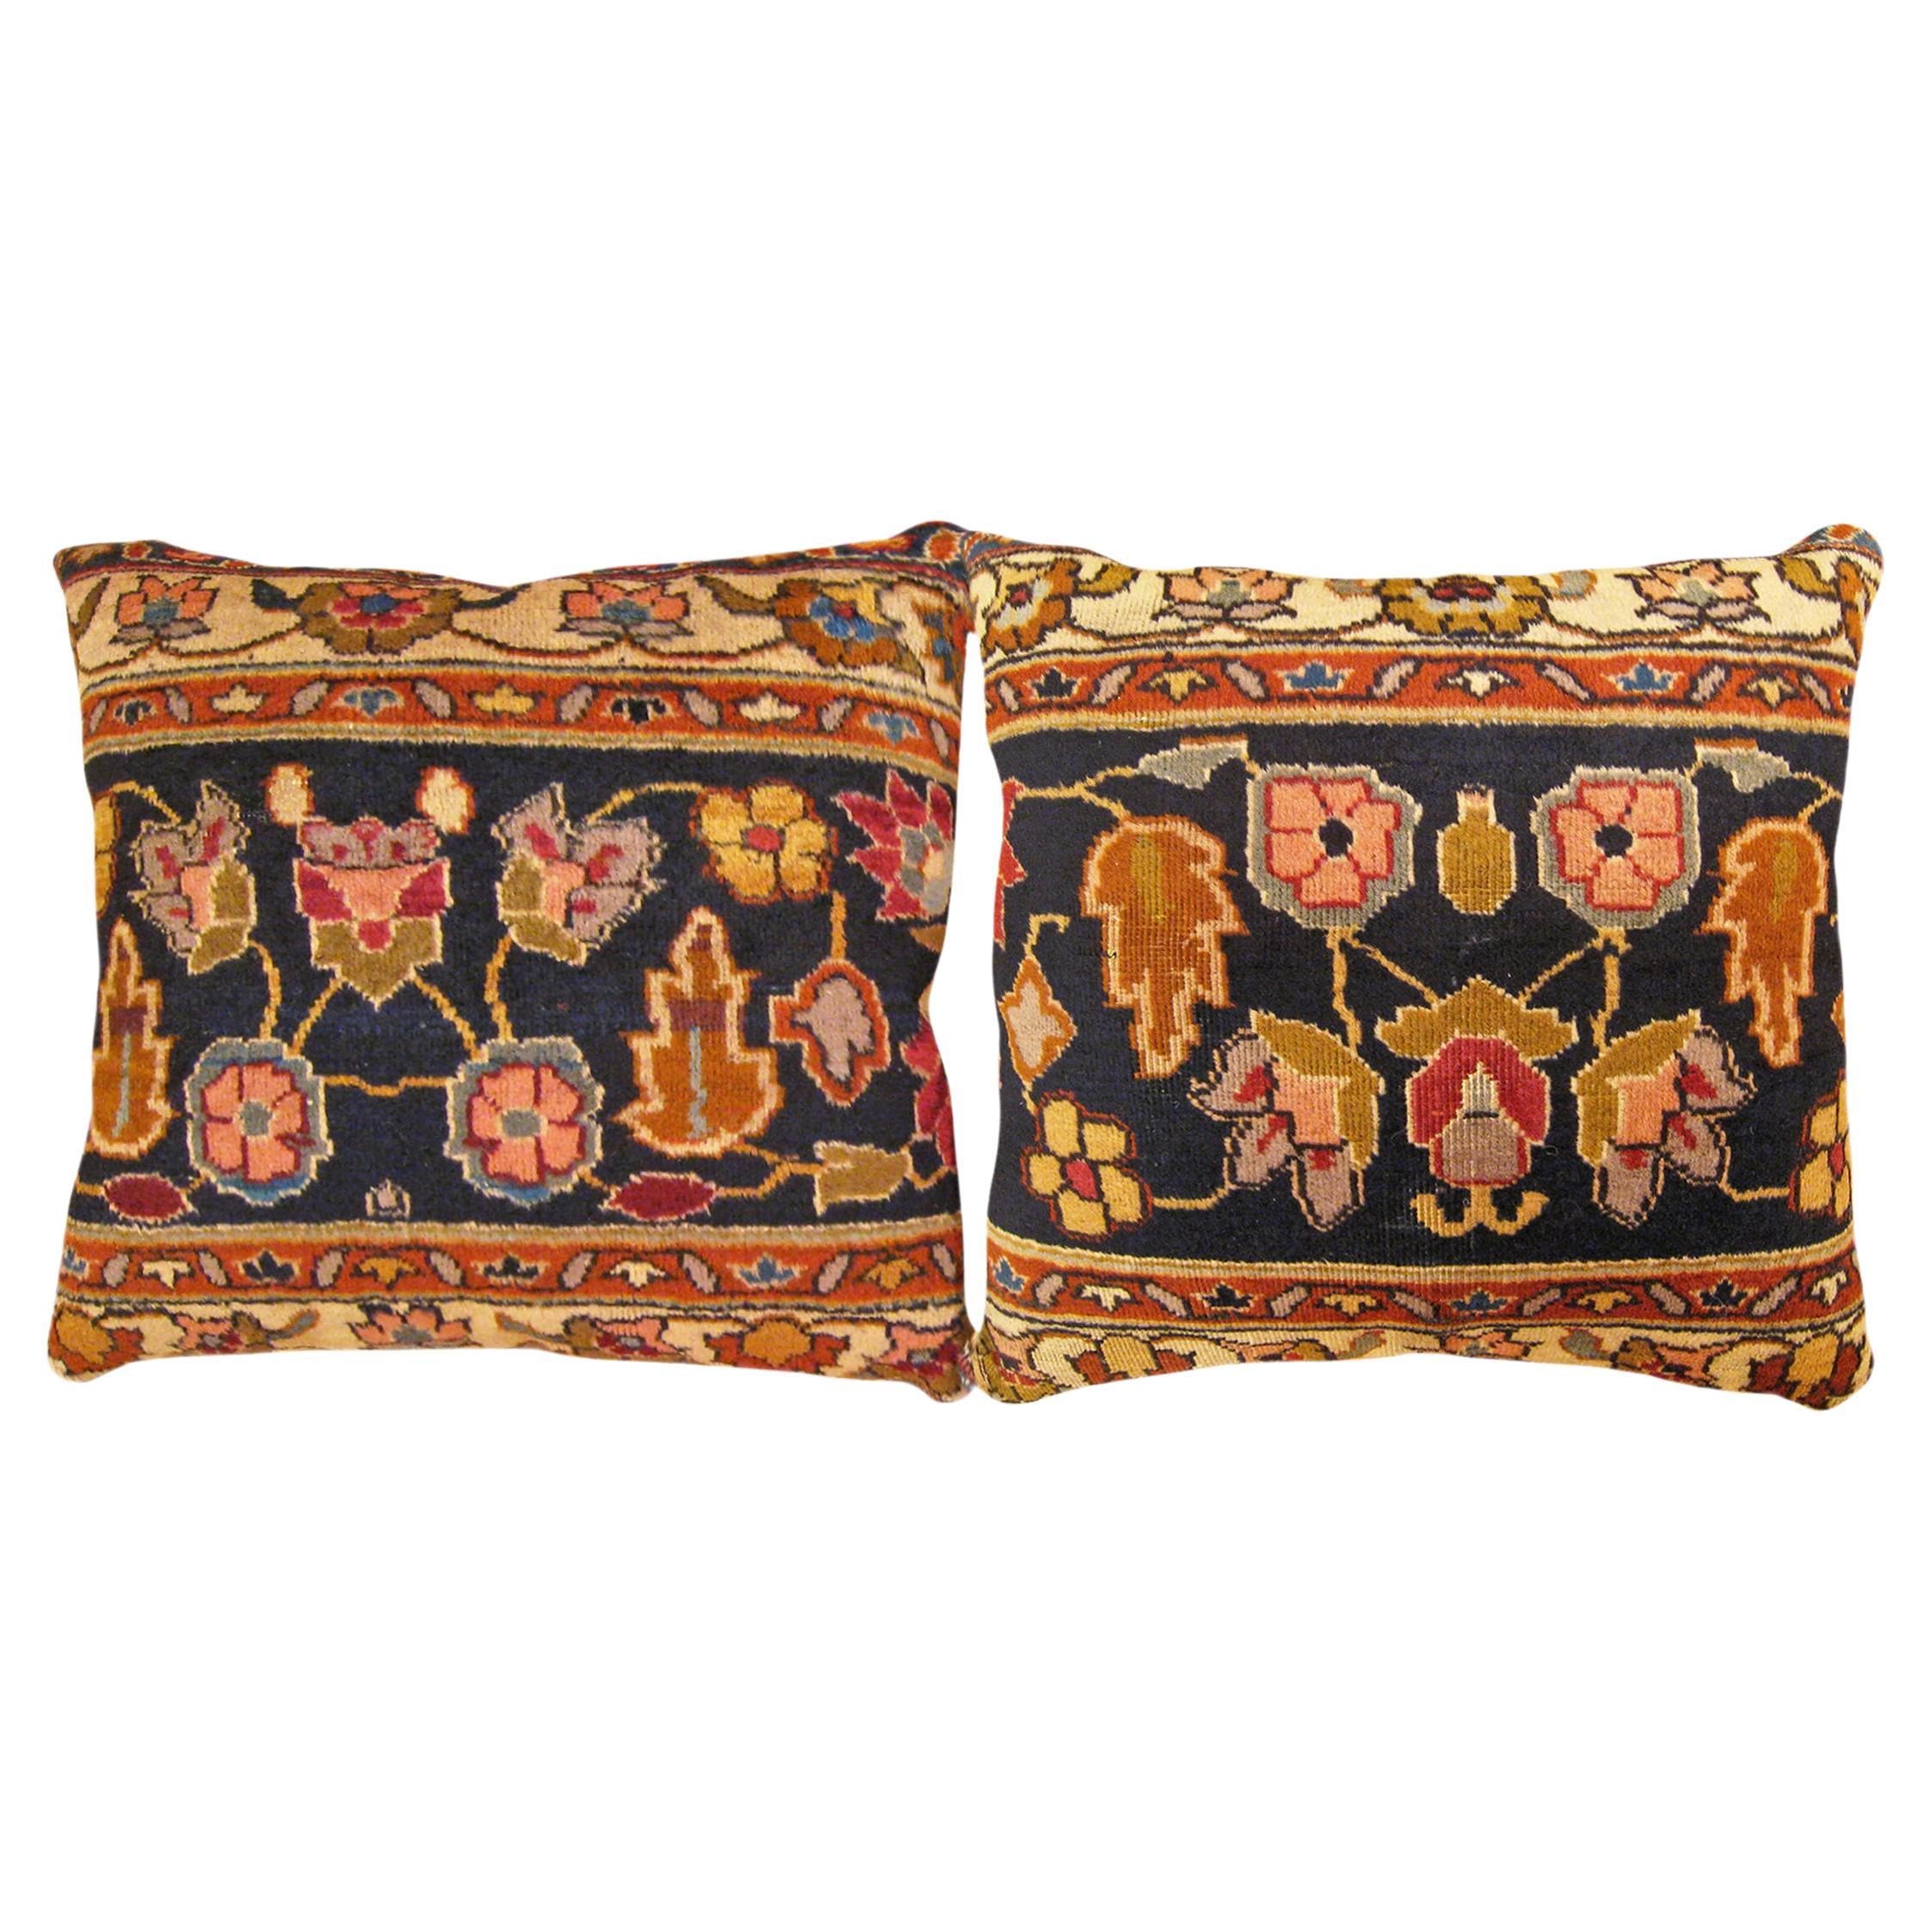 Pair of Decorative Antique Indian Agra Rug Pillows with Floral Elements For Sale